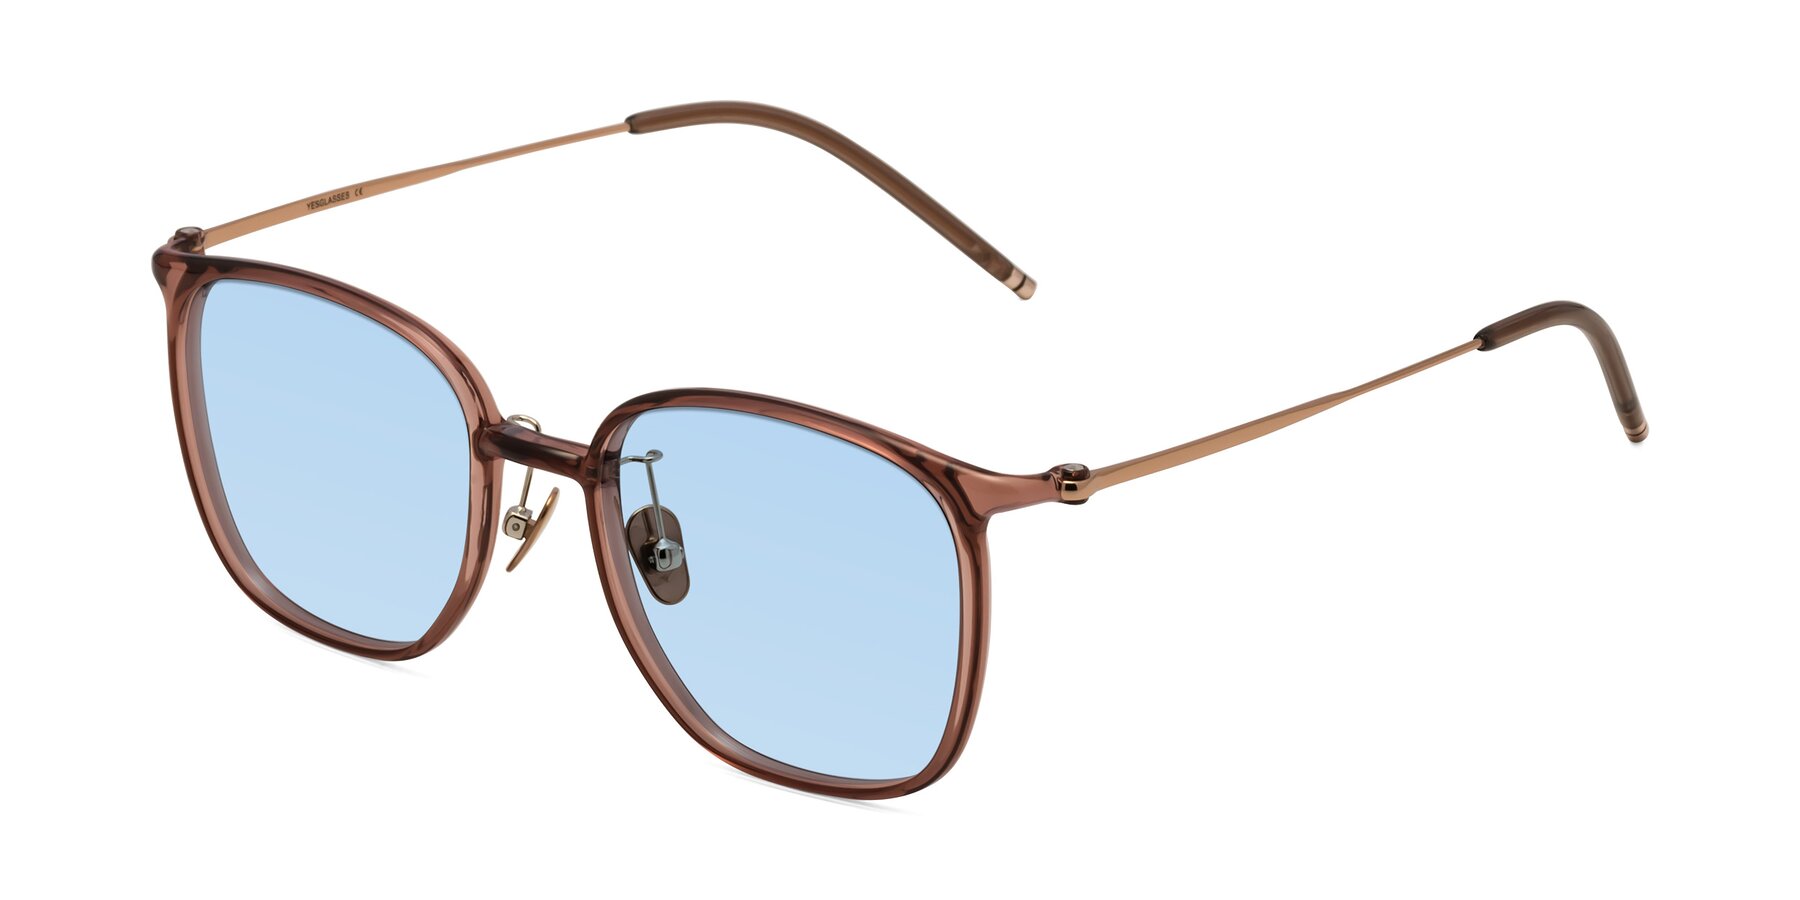 Angle of Manlius in Redwood with Light Blue Tinted Lenses